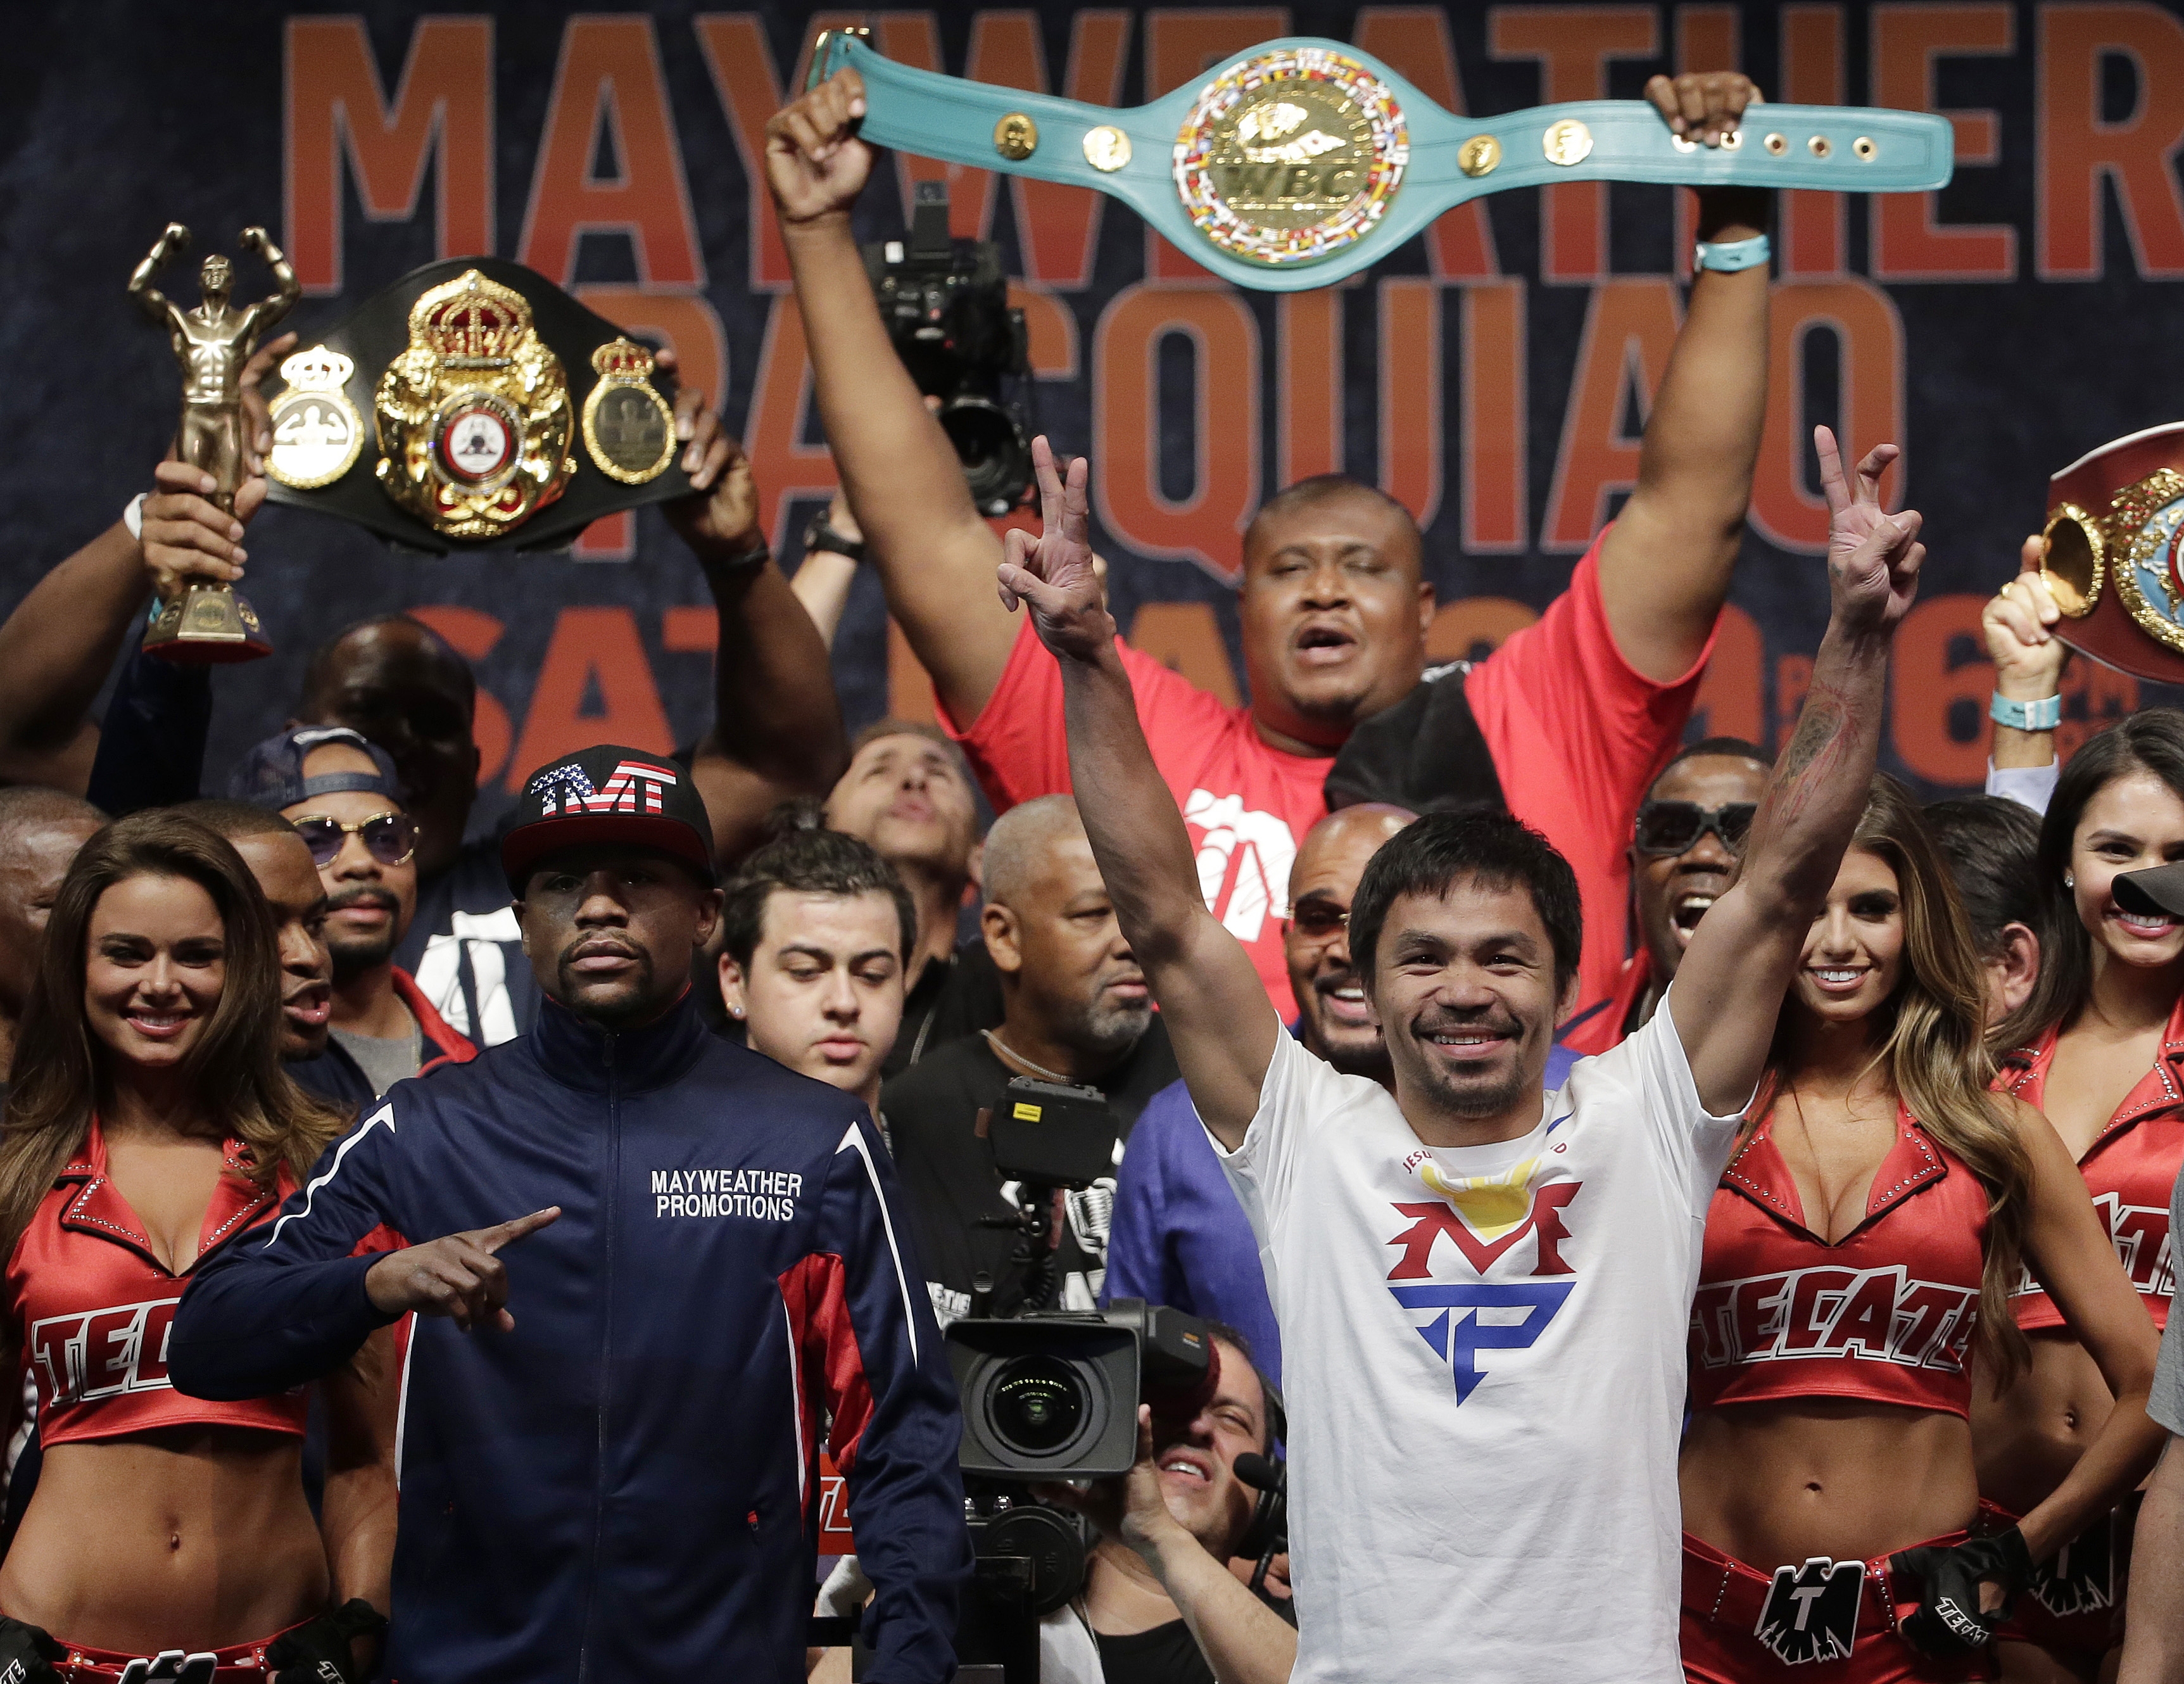 Floyd Mayweather Jr., left, and Manny Pacquiao pose during their weigh-in on Friday, May 1, 2015 in Las Vegas. The world weltherweight title fight between Mayweather Jr. and Pacquiao is scheduled for May 2. (AP Photo/Chris Carlson)